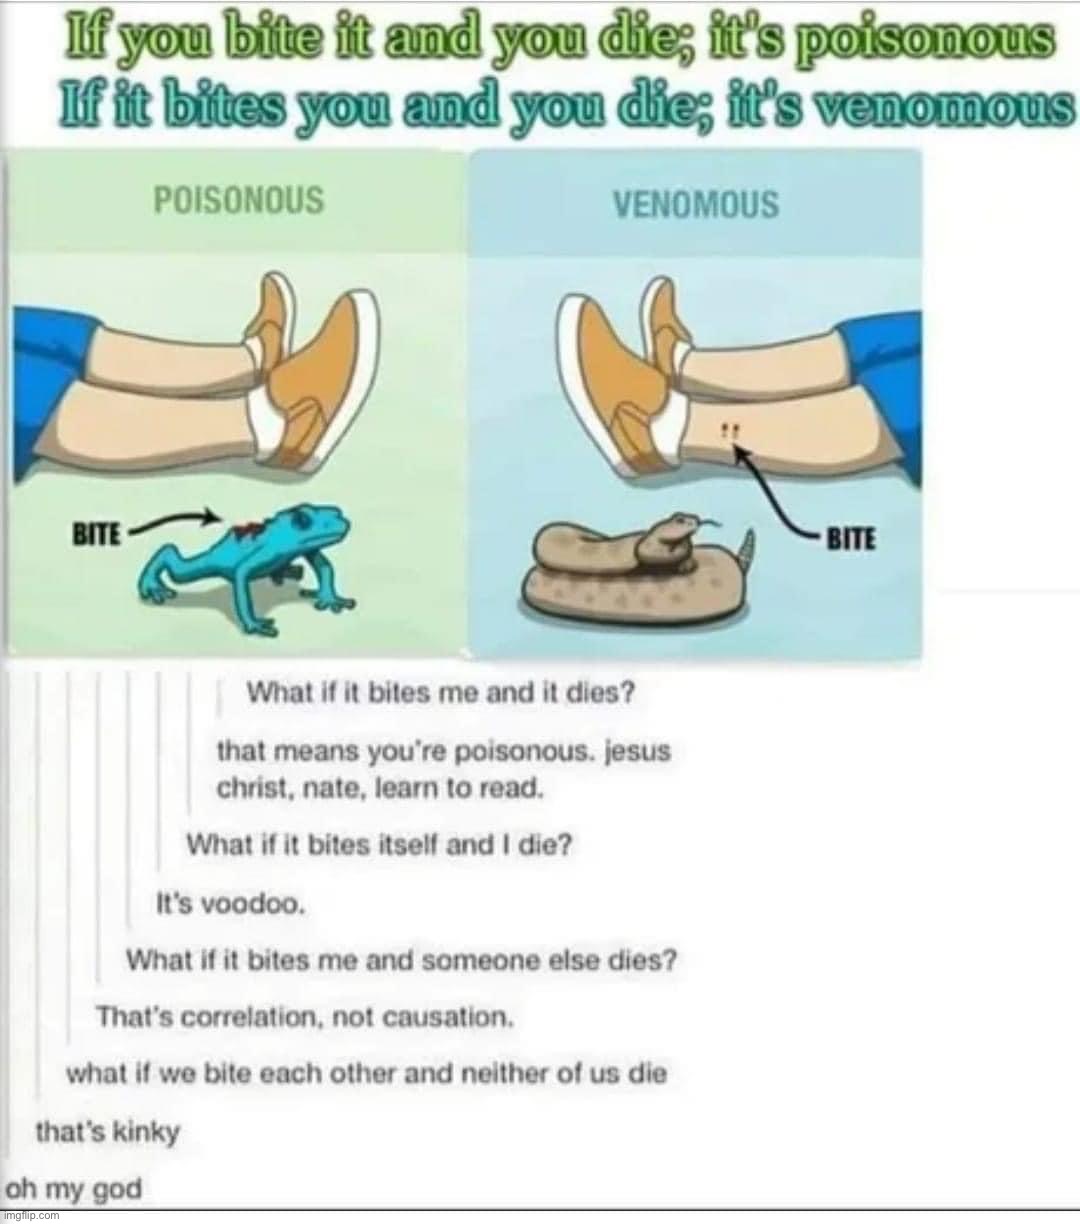 How to use proper vocabulary whilst dying | image tagged in poisonous vs venomous,poison,venom,psa,public service announcement,bruh | made w/ Imgflip meme maker